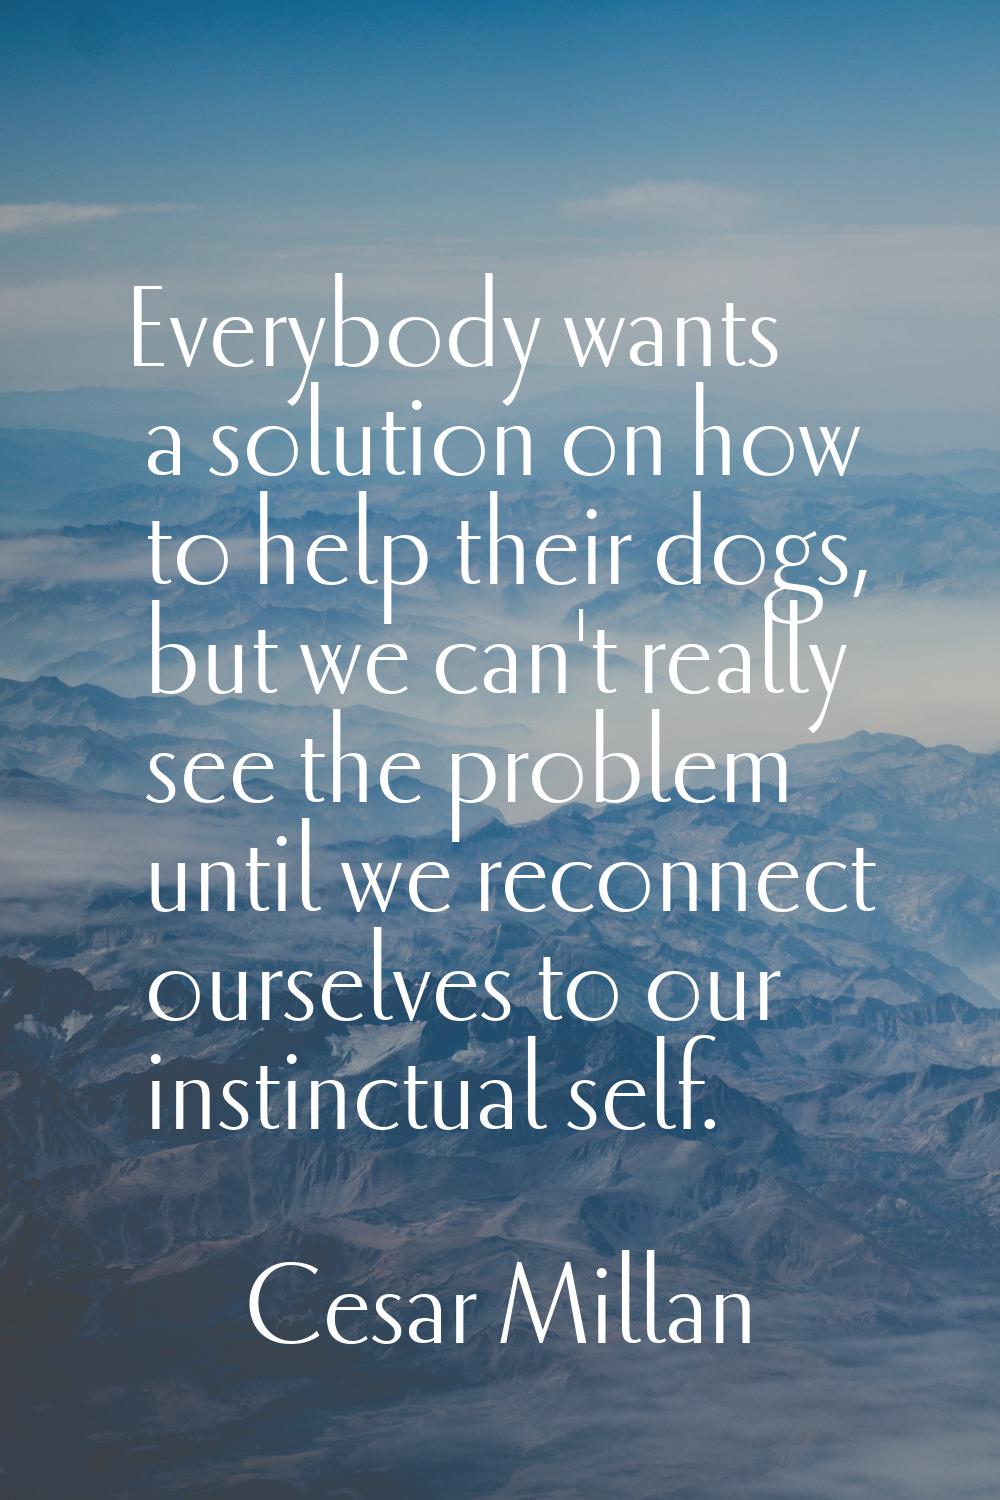 Everybody wants a solution on how to help their dogs, but we can't really see the problem until we 